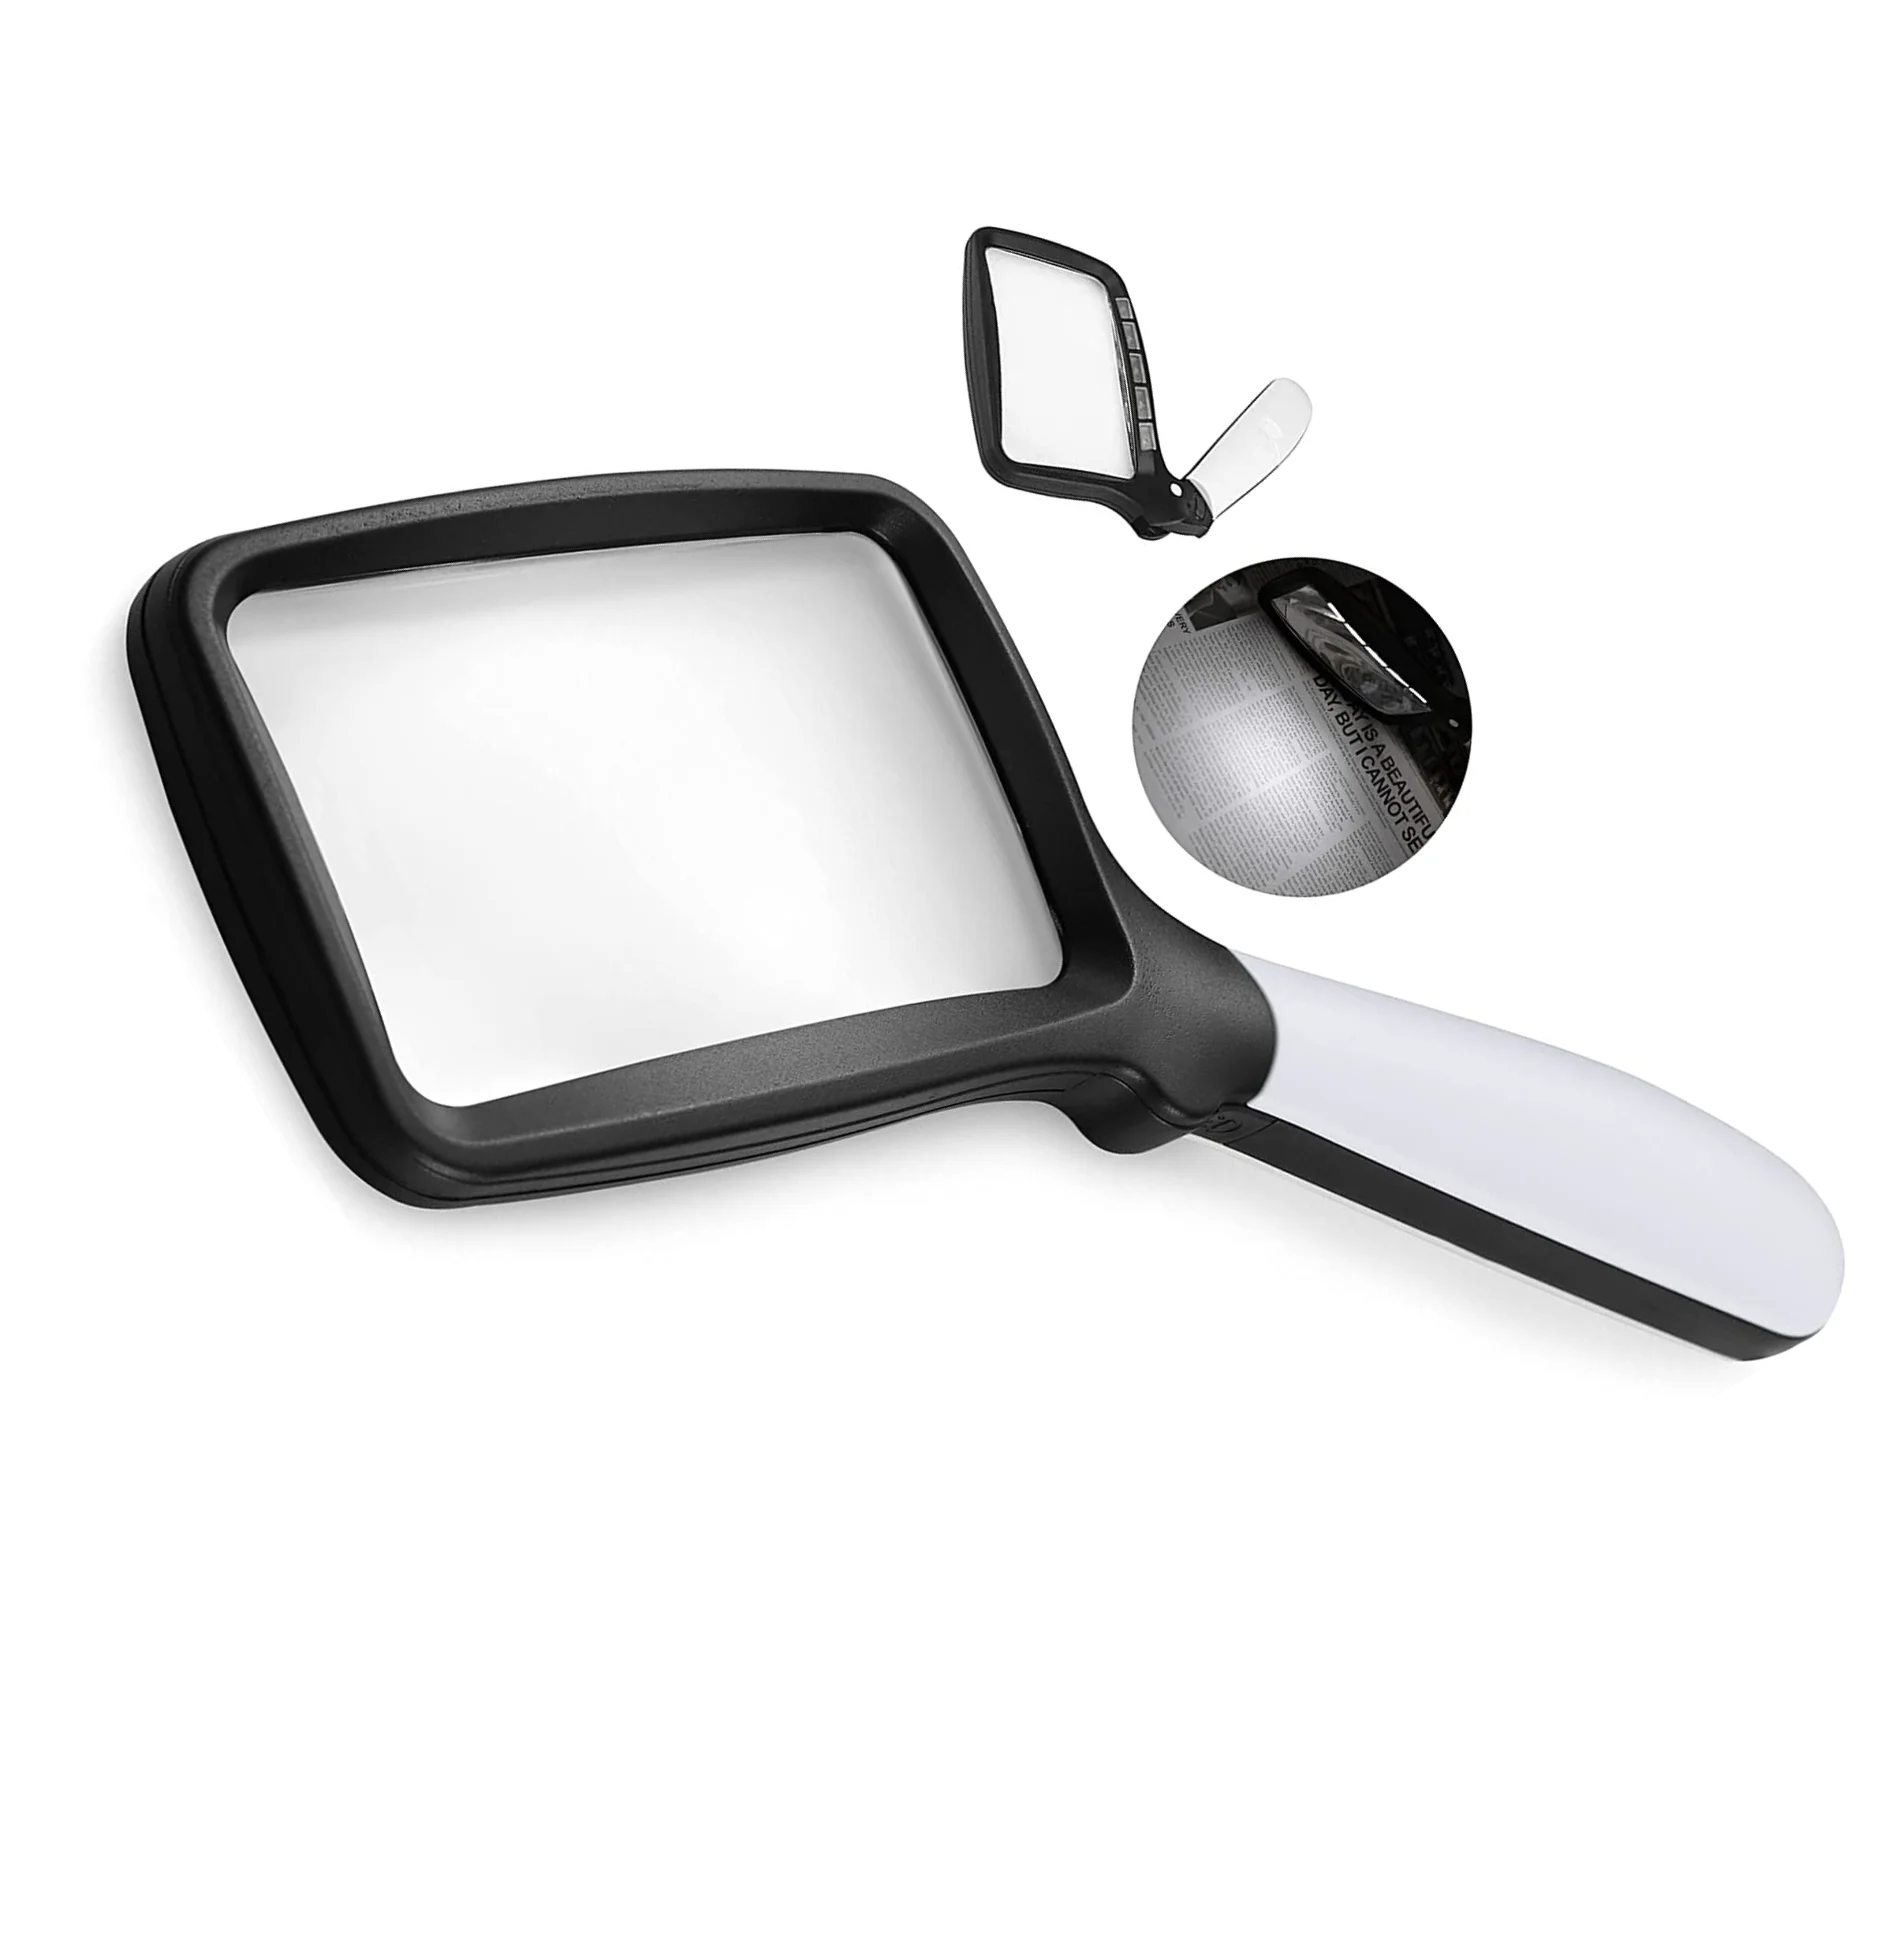 

Glass For Large Magnifying Light, Magnifier Dimmable Handheld Lighted Rectangle Degeneration With Macular Folding With